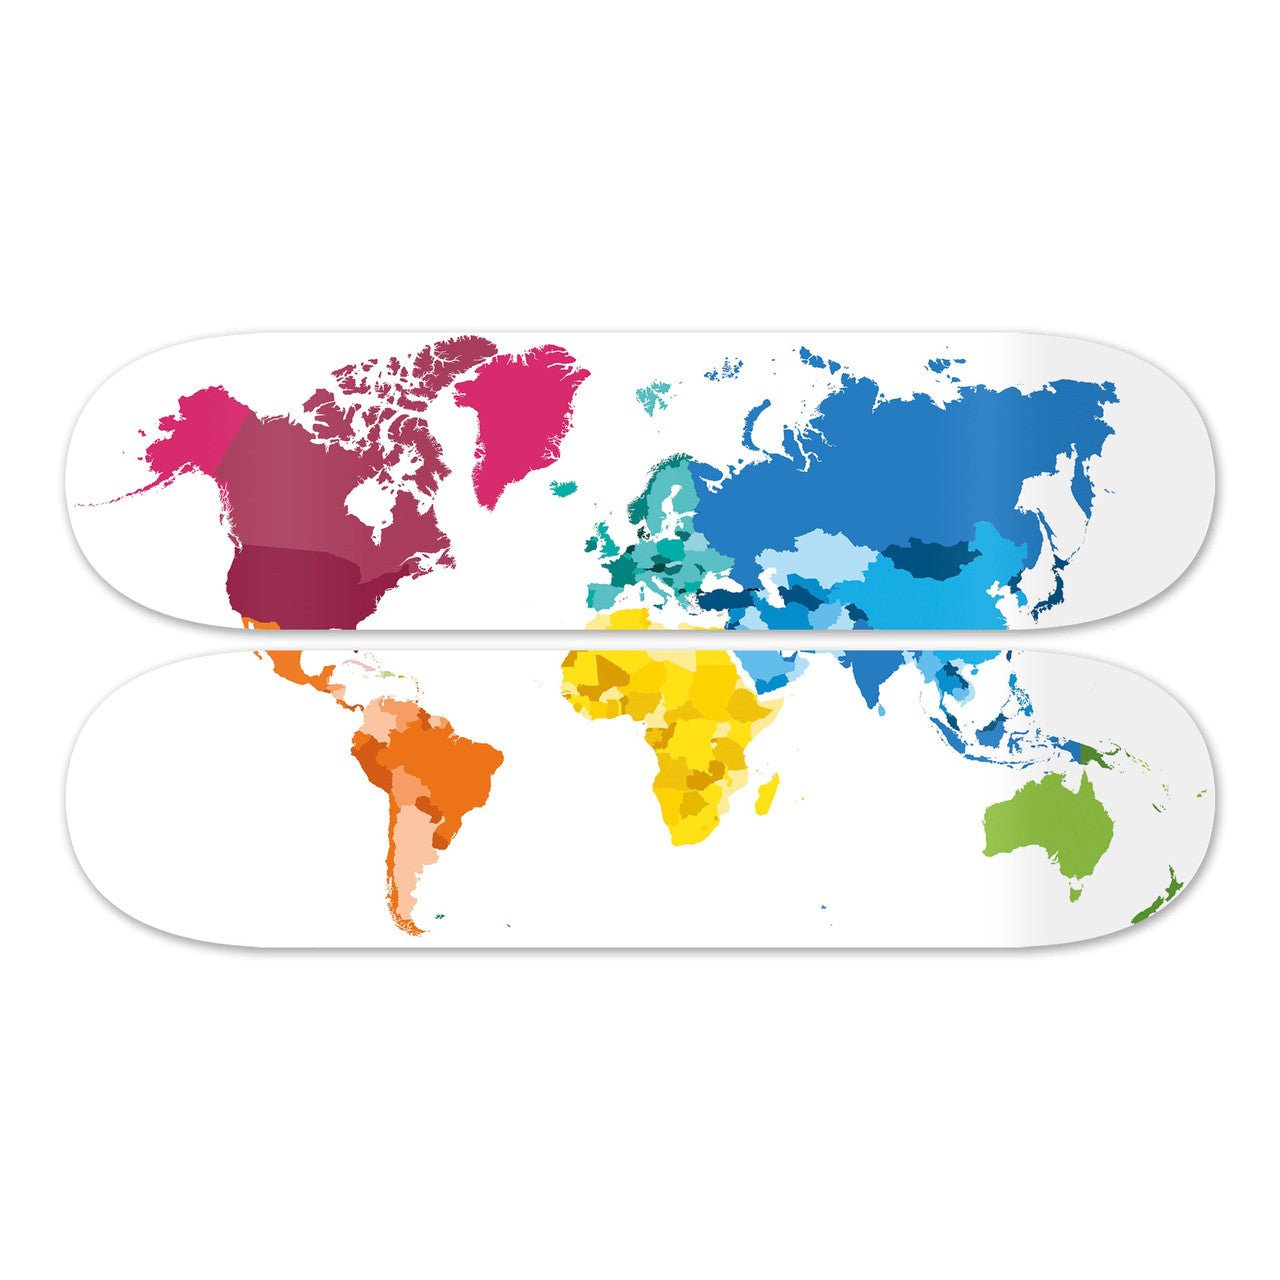 "World Map" - Skateboard - The Art Lab Acrylic Glass Art - Skateboards, Surfboards & Glass Prints Wall Decor for your Home.